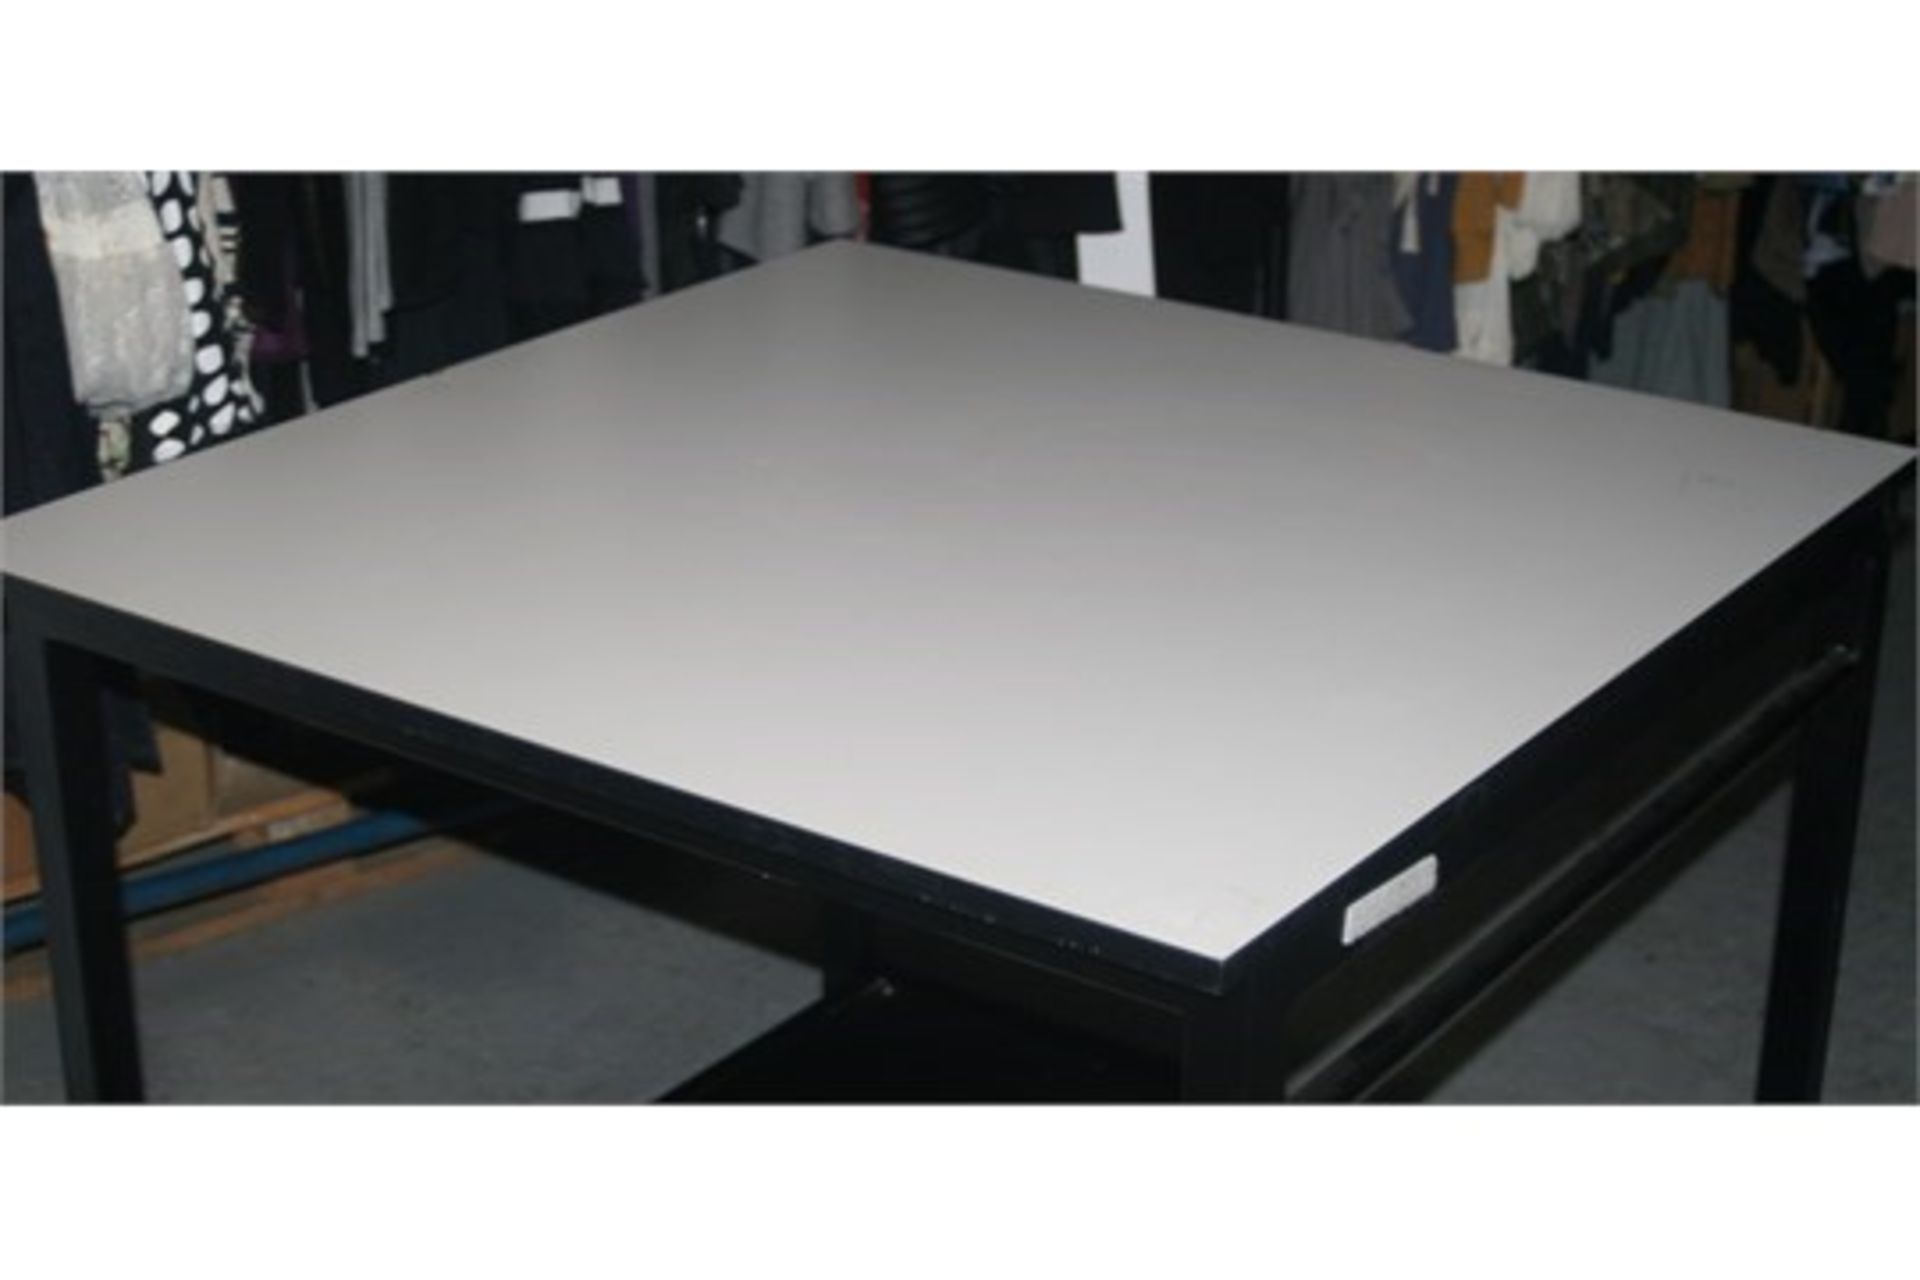 1 x Mobile Work Table - Large Size With Undershelf and Heavy Duty Castor Wheels - Strong Build - Image 2 of 8